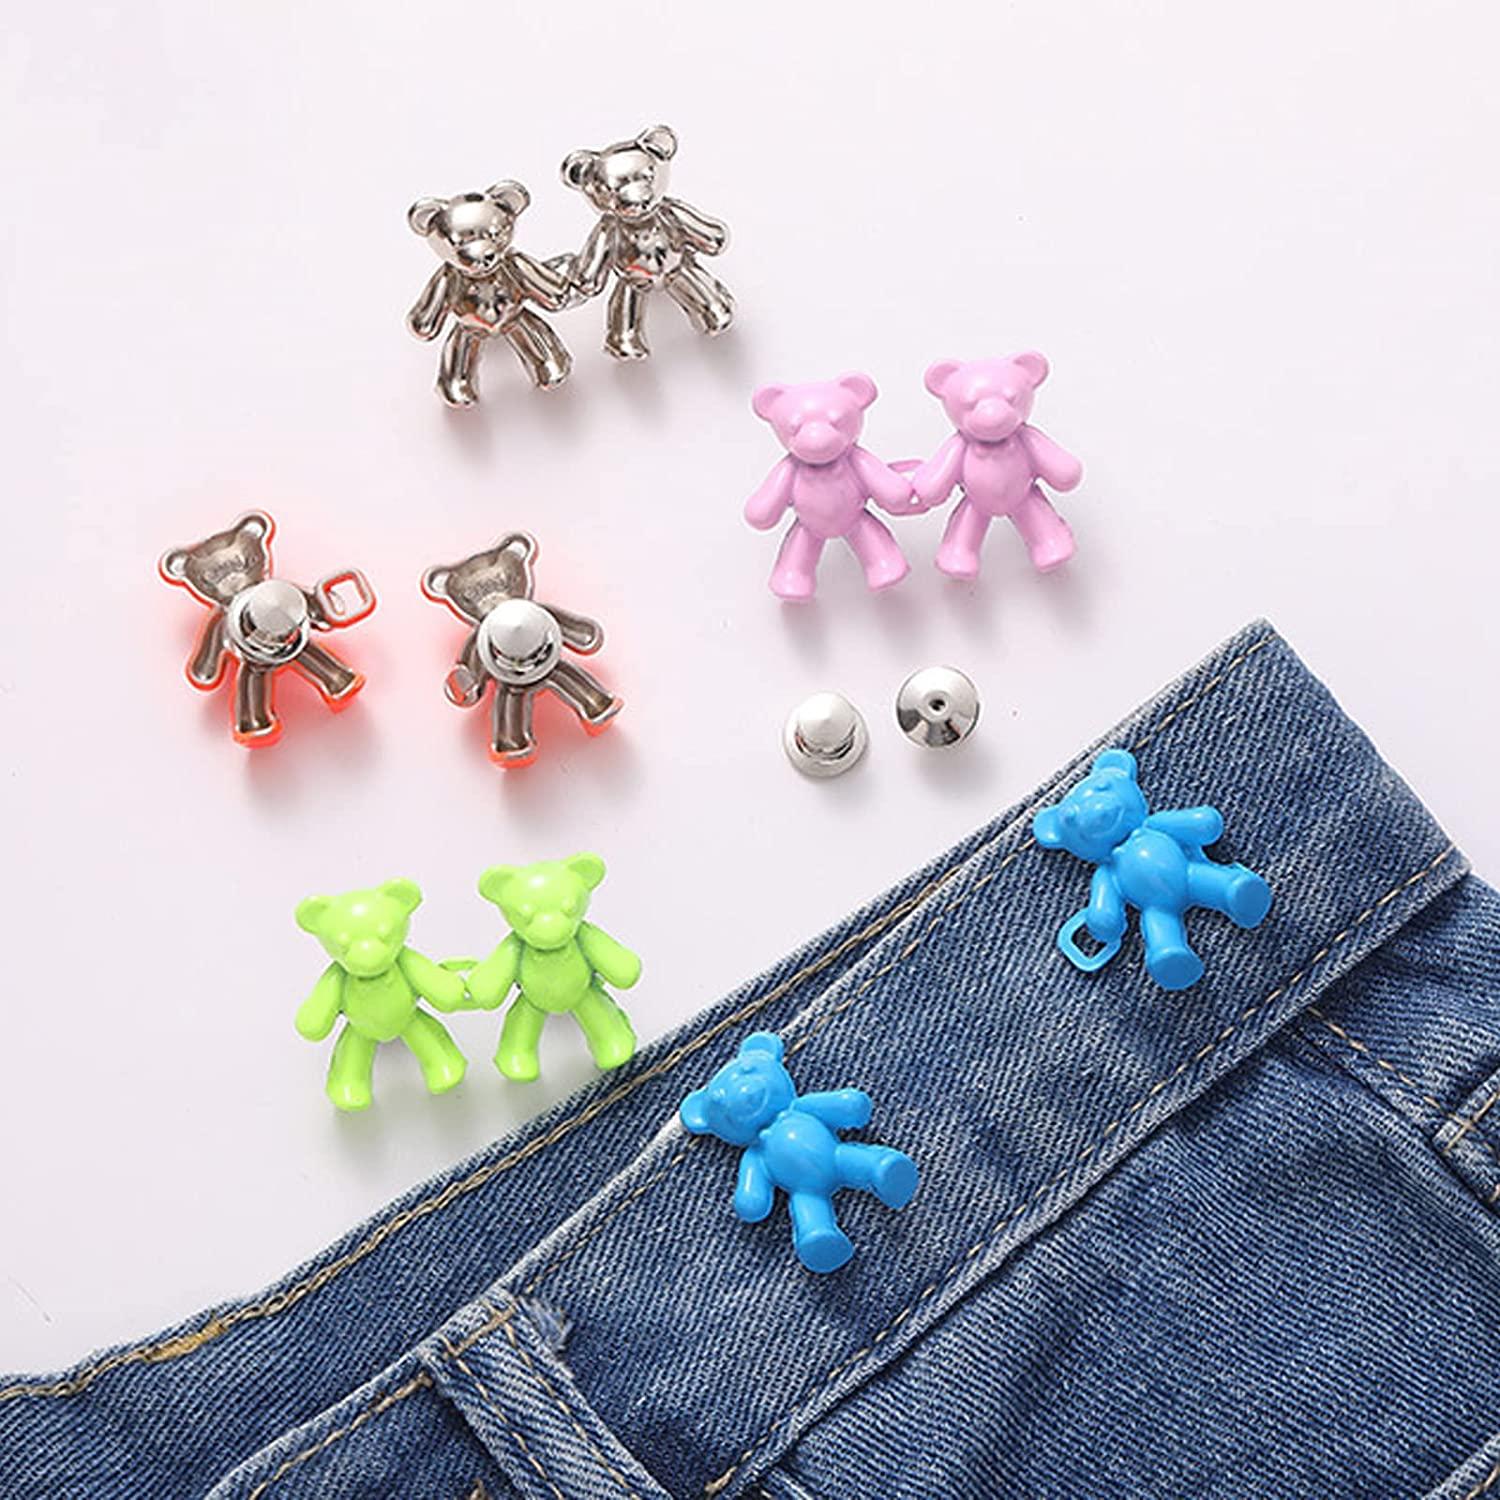  Bear Button Pins for Jeans,No Sew and No Tools Bear